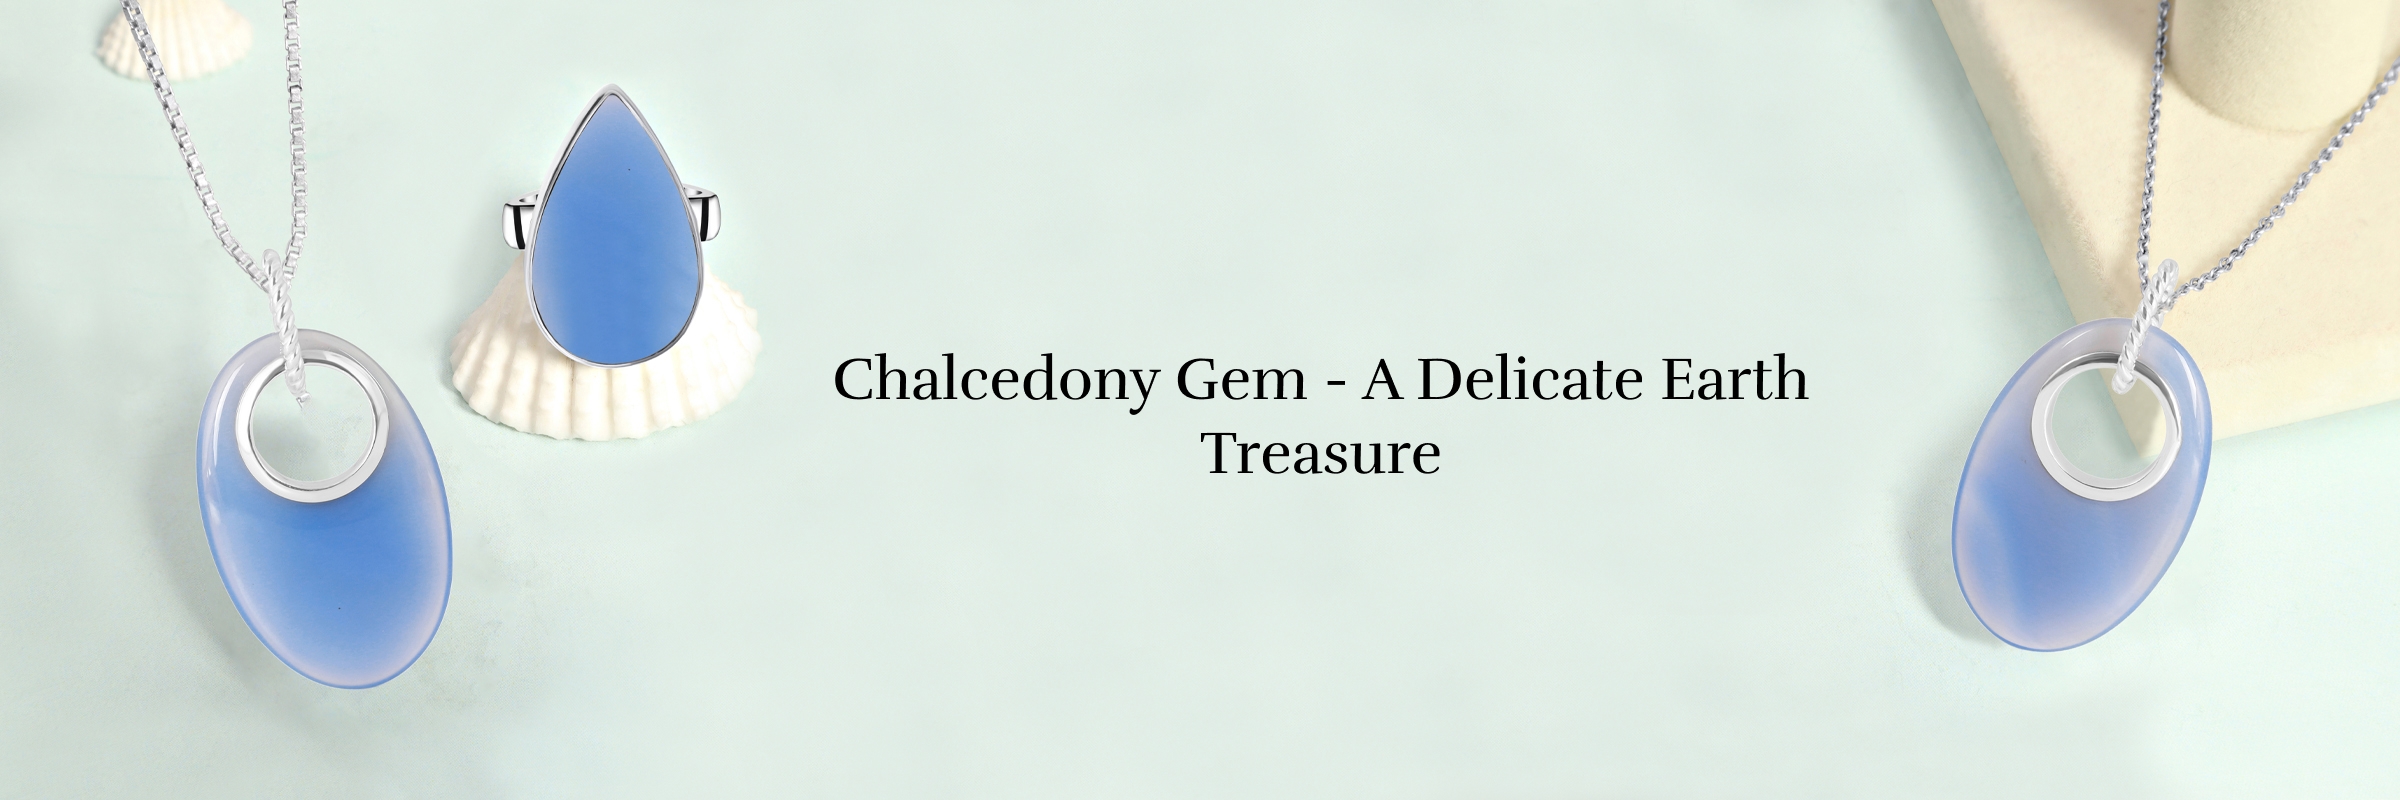 Physical Properties of Chalcedony Gemstone